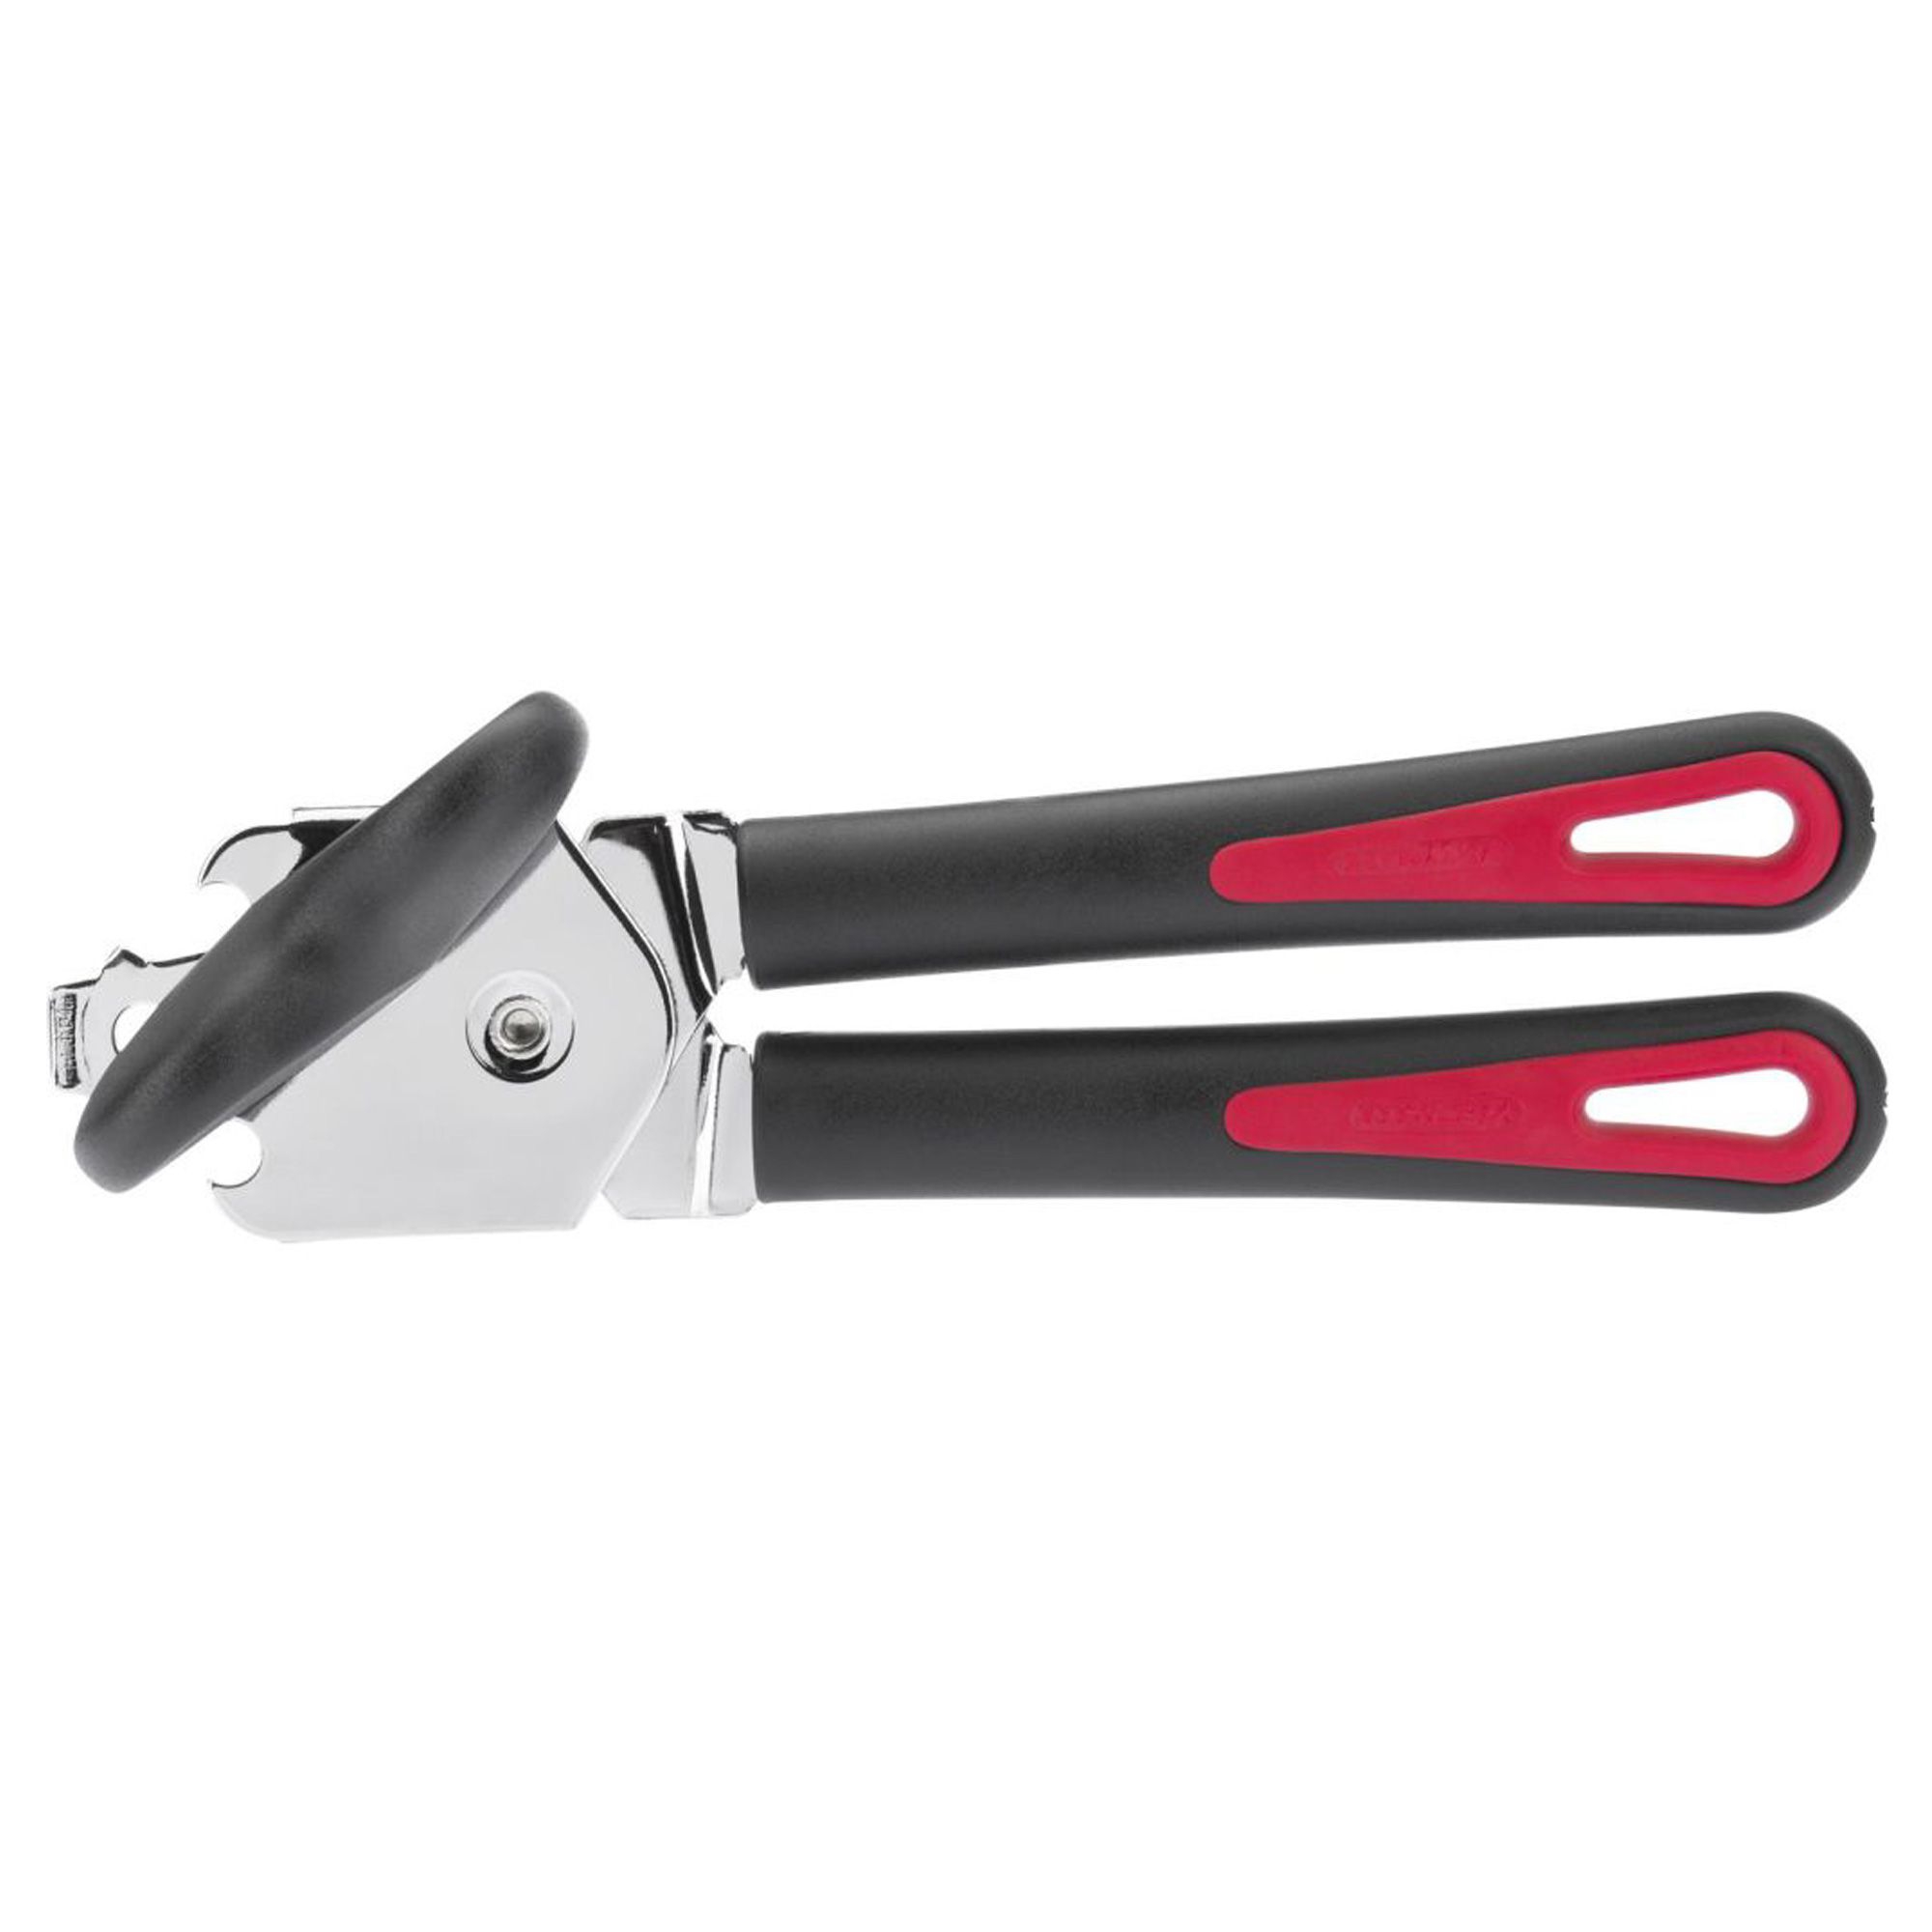 Westmark - "Gallant" pincer can opener